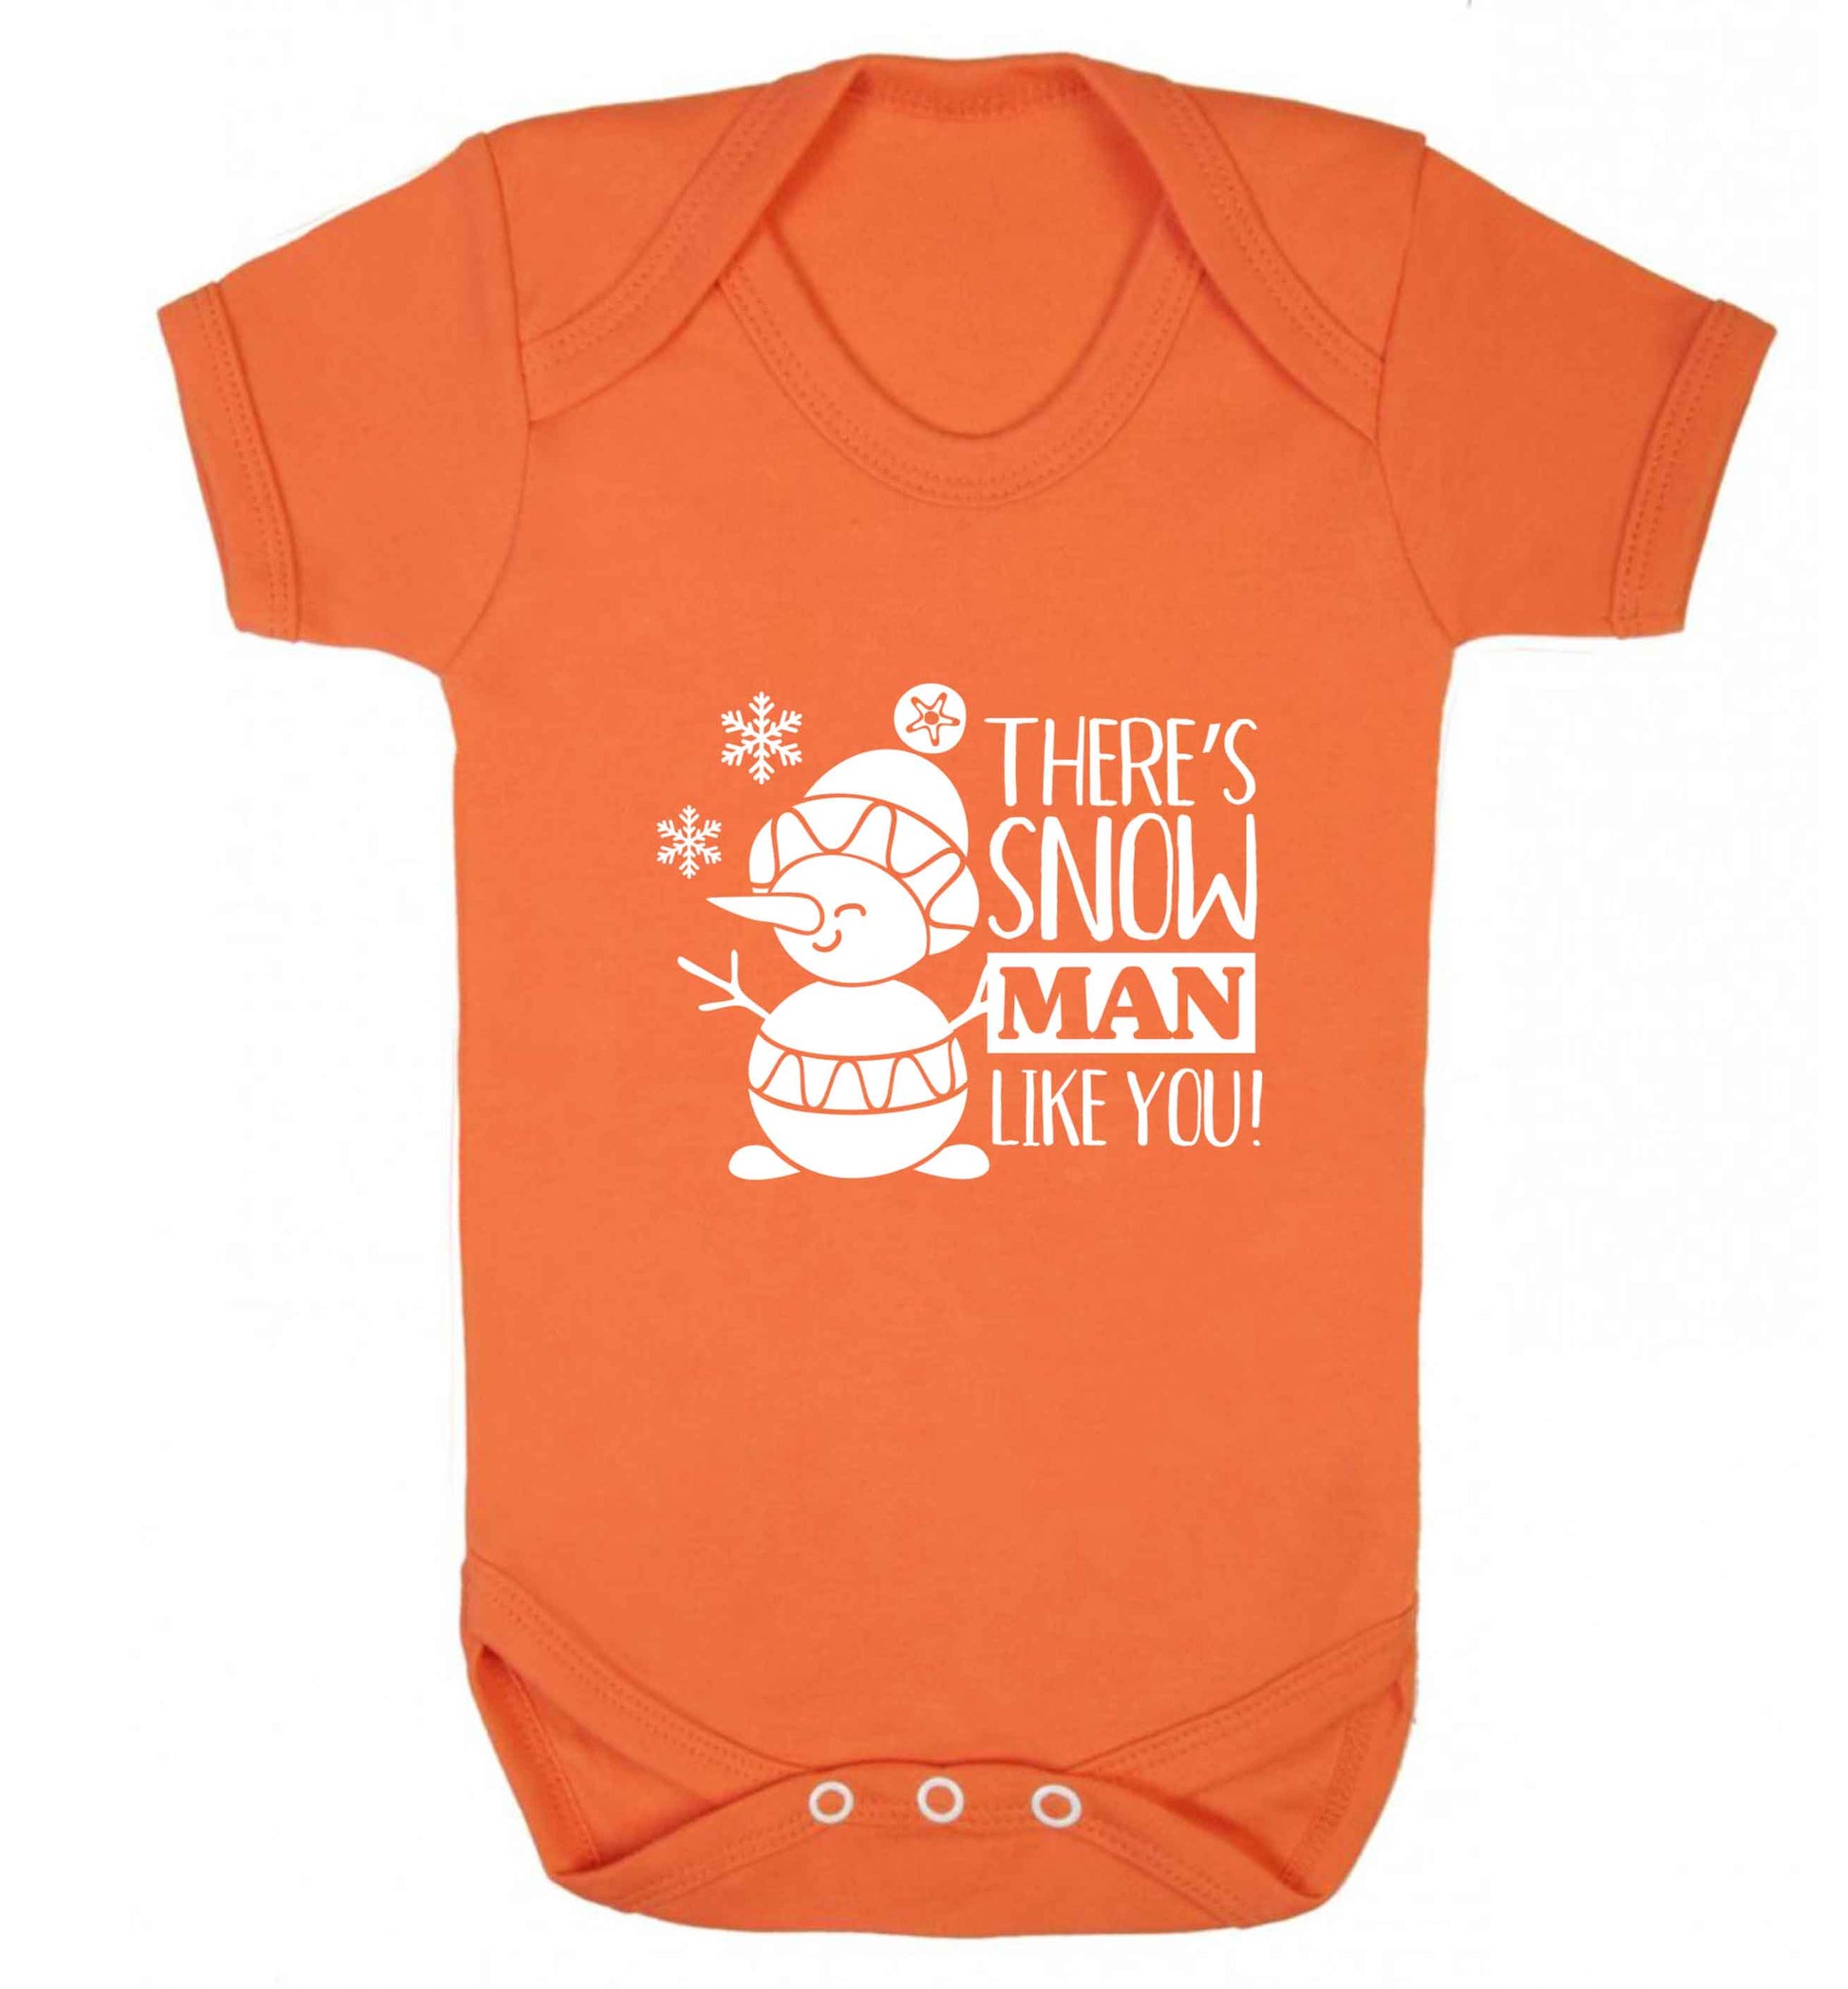 There's snow man like you baby vest orange 18-24 months